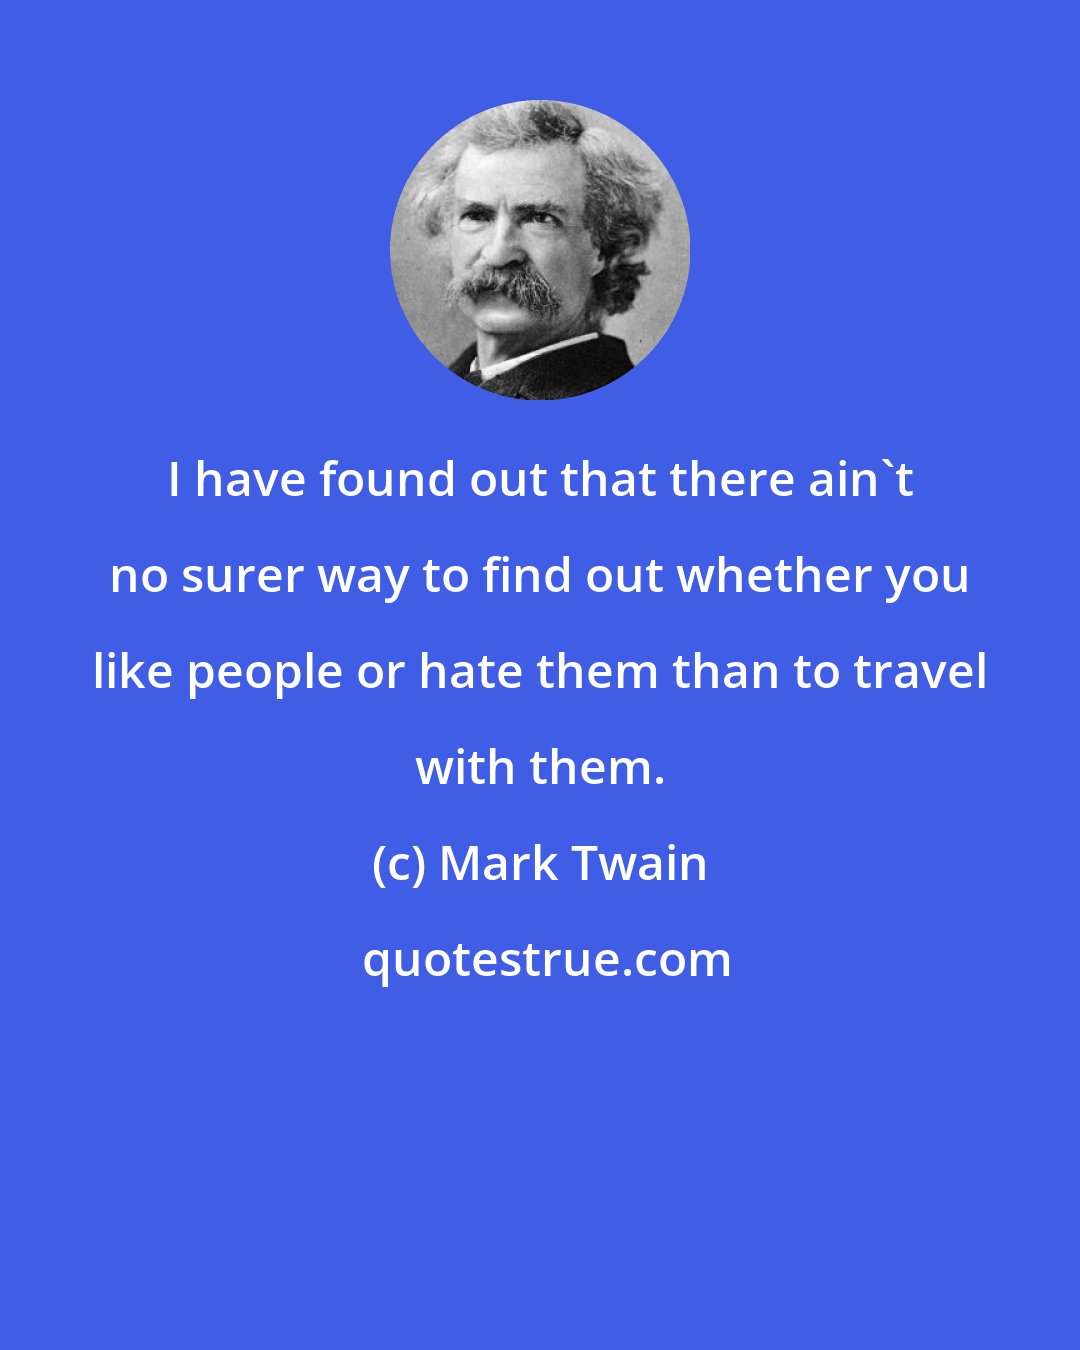 Mark Twain: I have found out that there ain't no surer way to find out whether you like people or hate them than to travel with them.